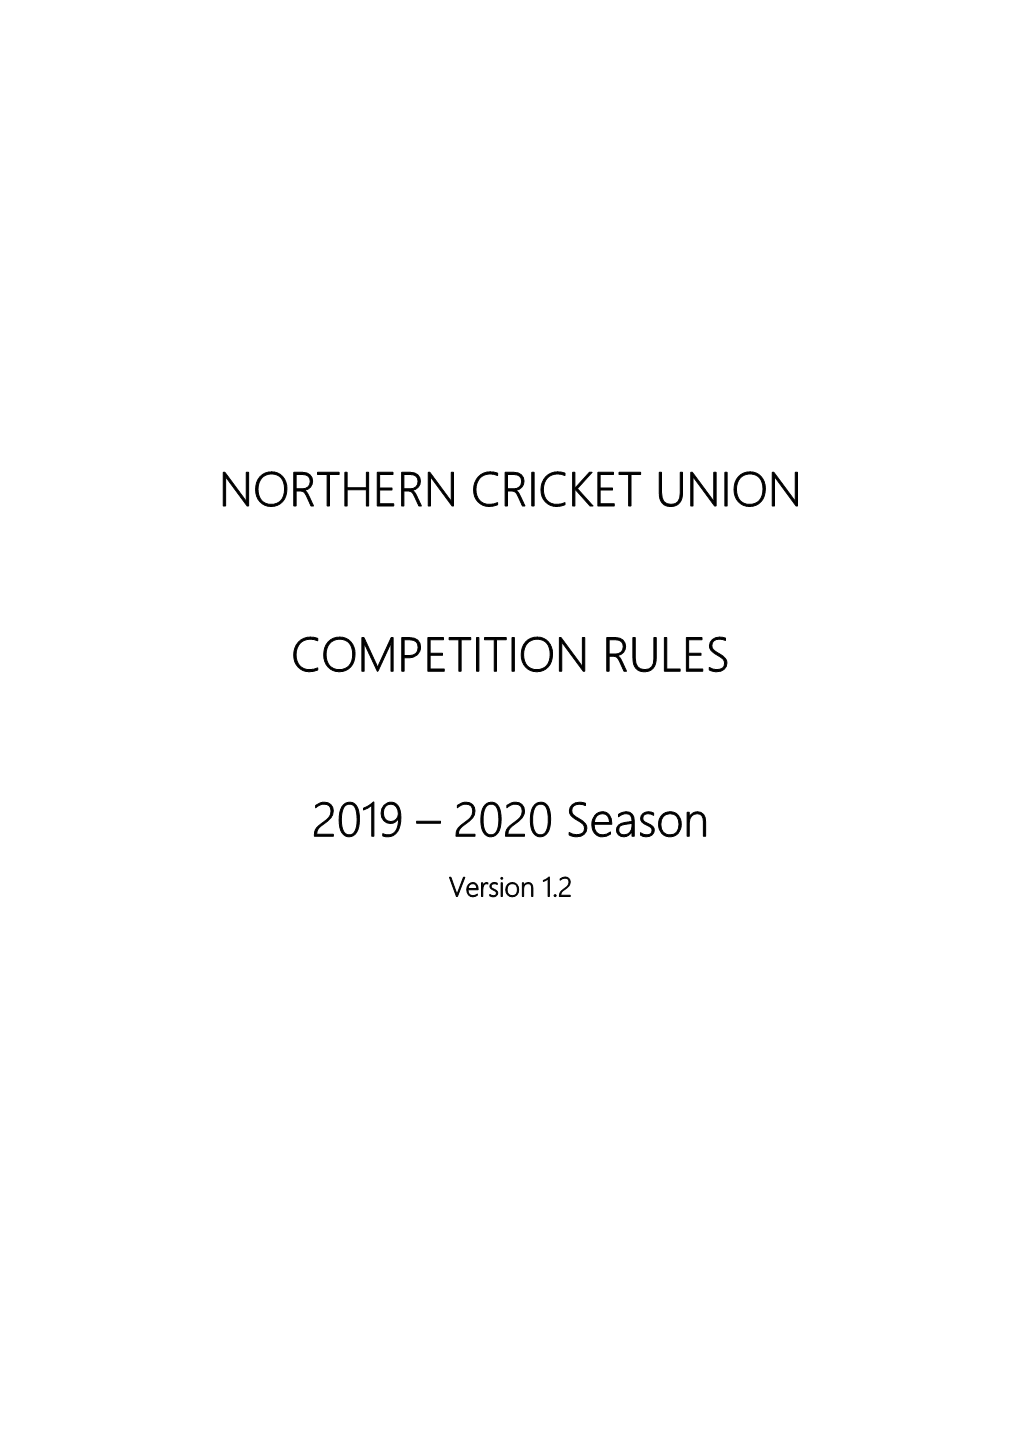 Northern Cricket Union Competition Rules 2019